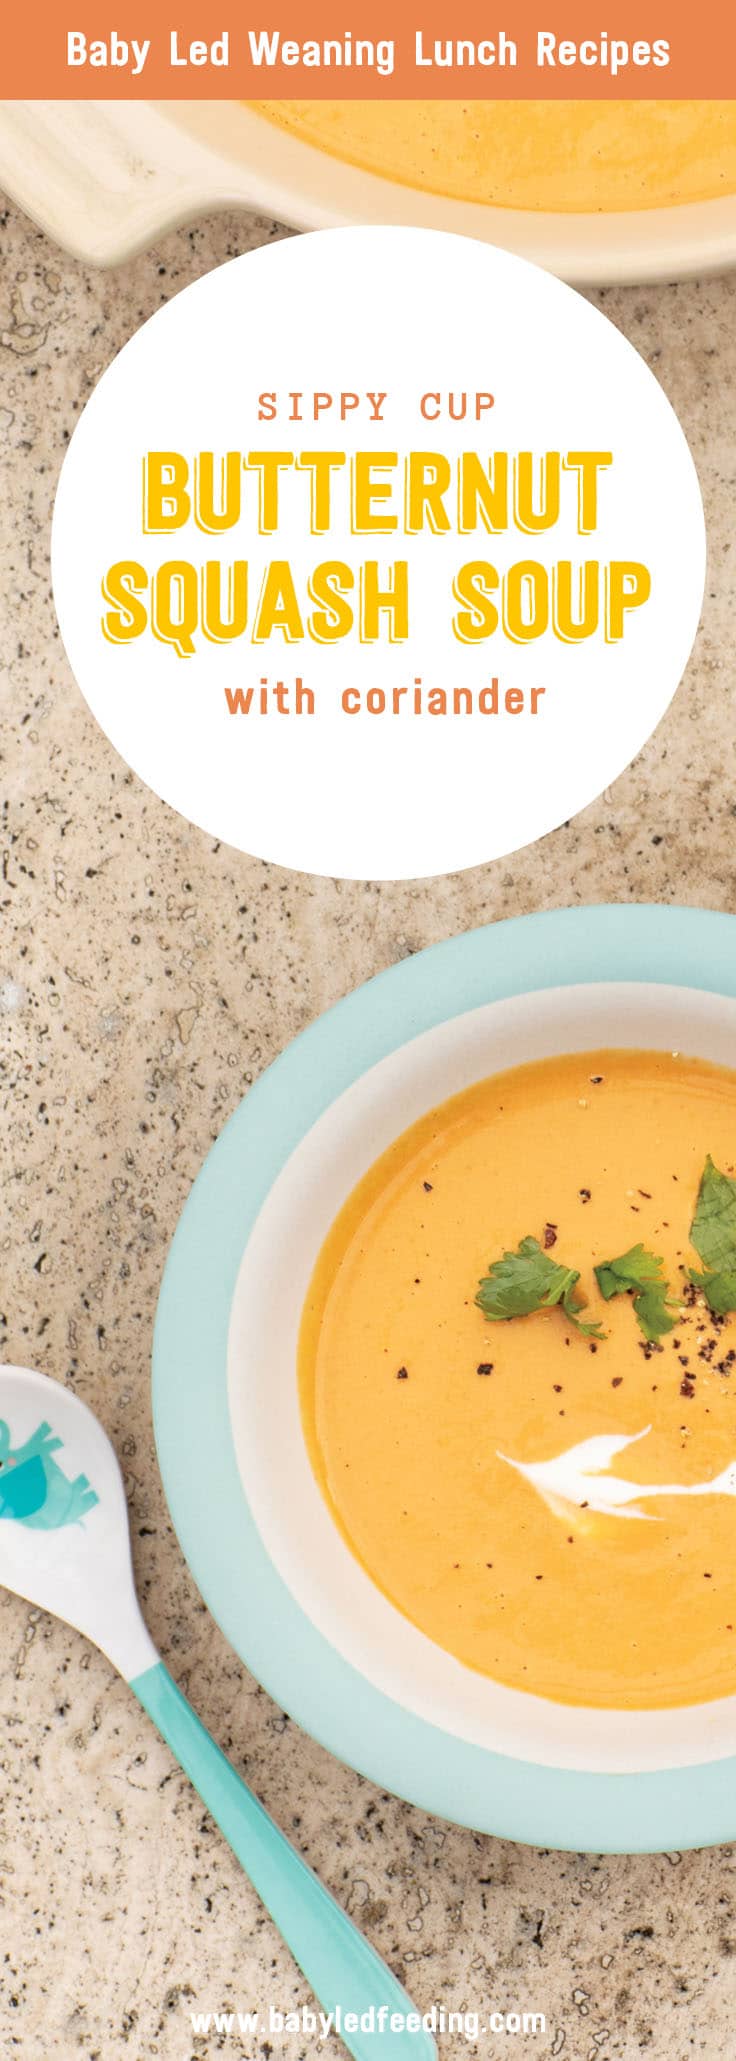 Baby Led Feeding Pinterest Butternut Squash Curried Soup